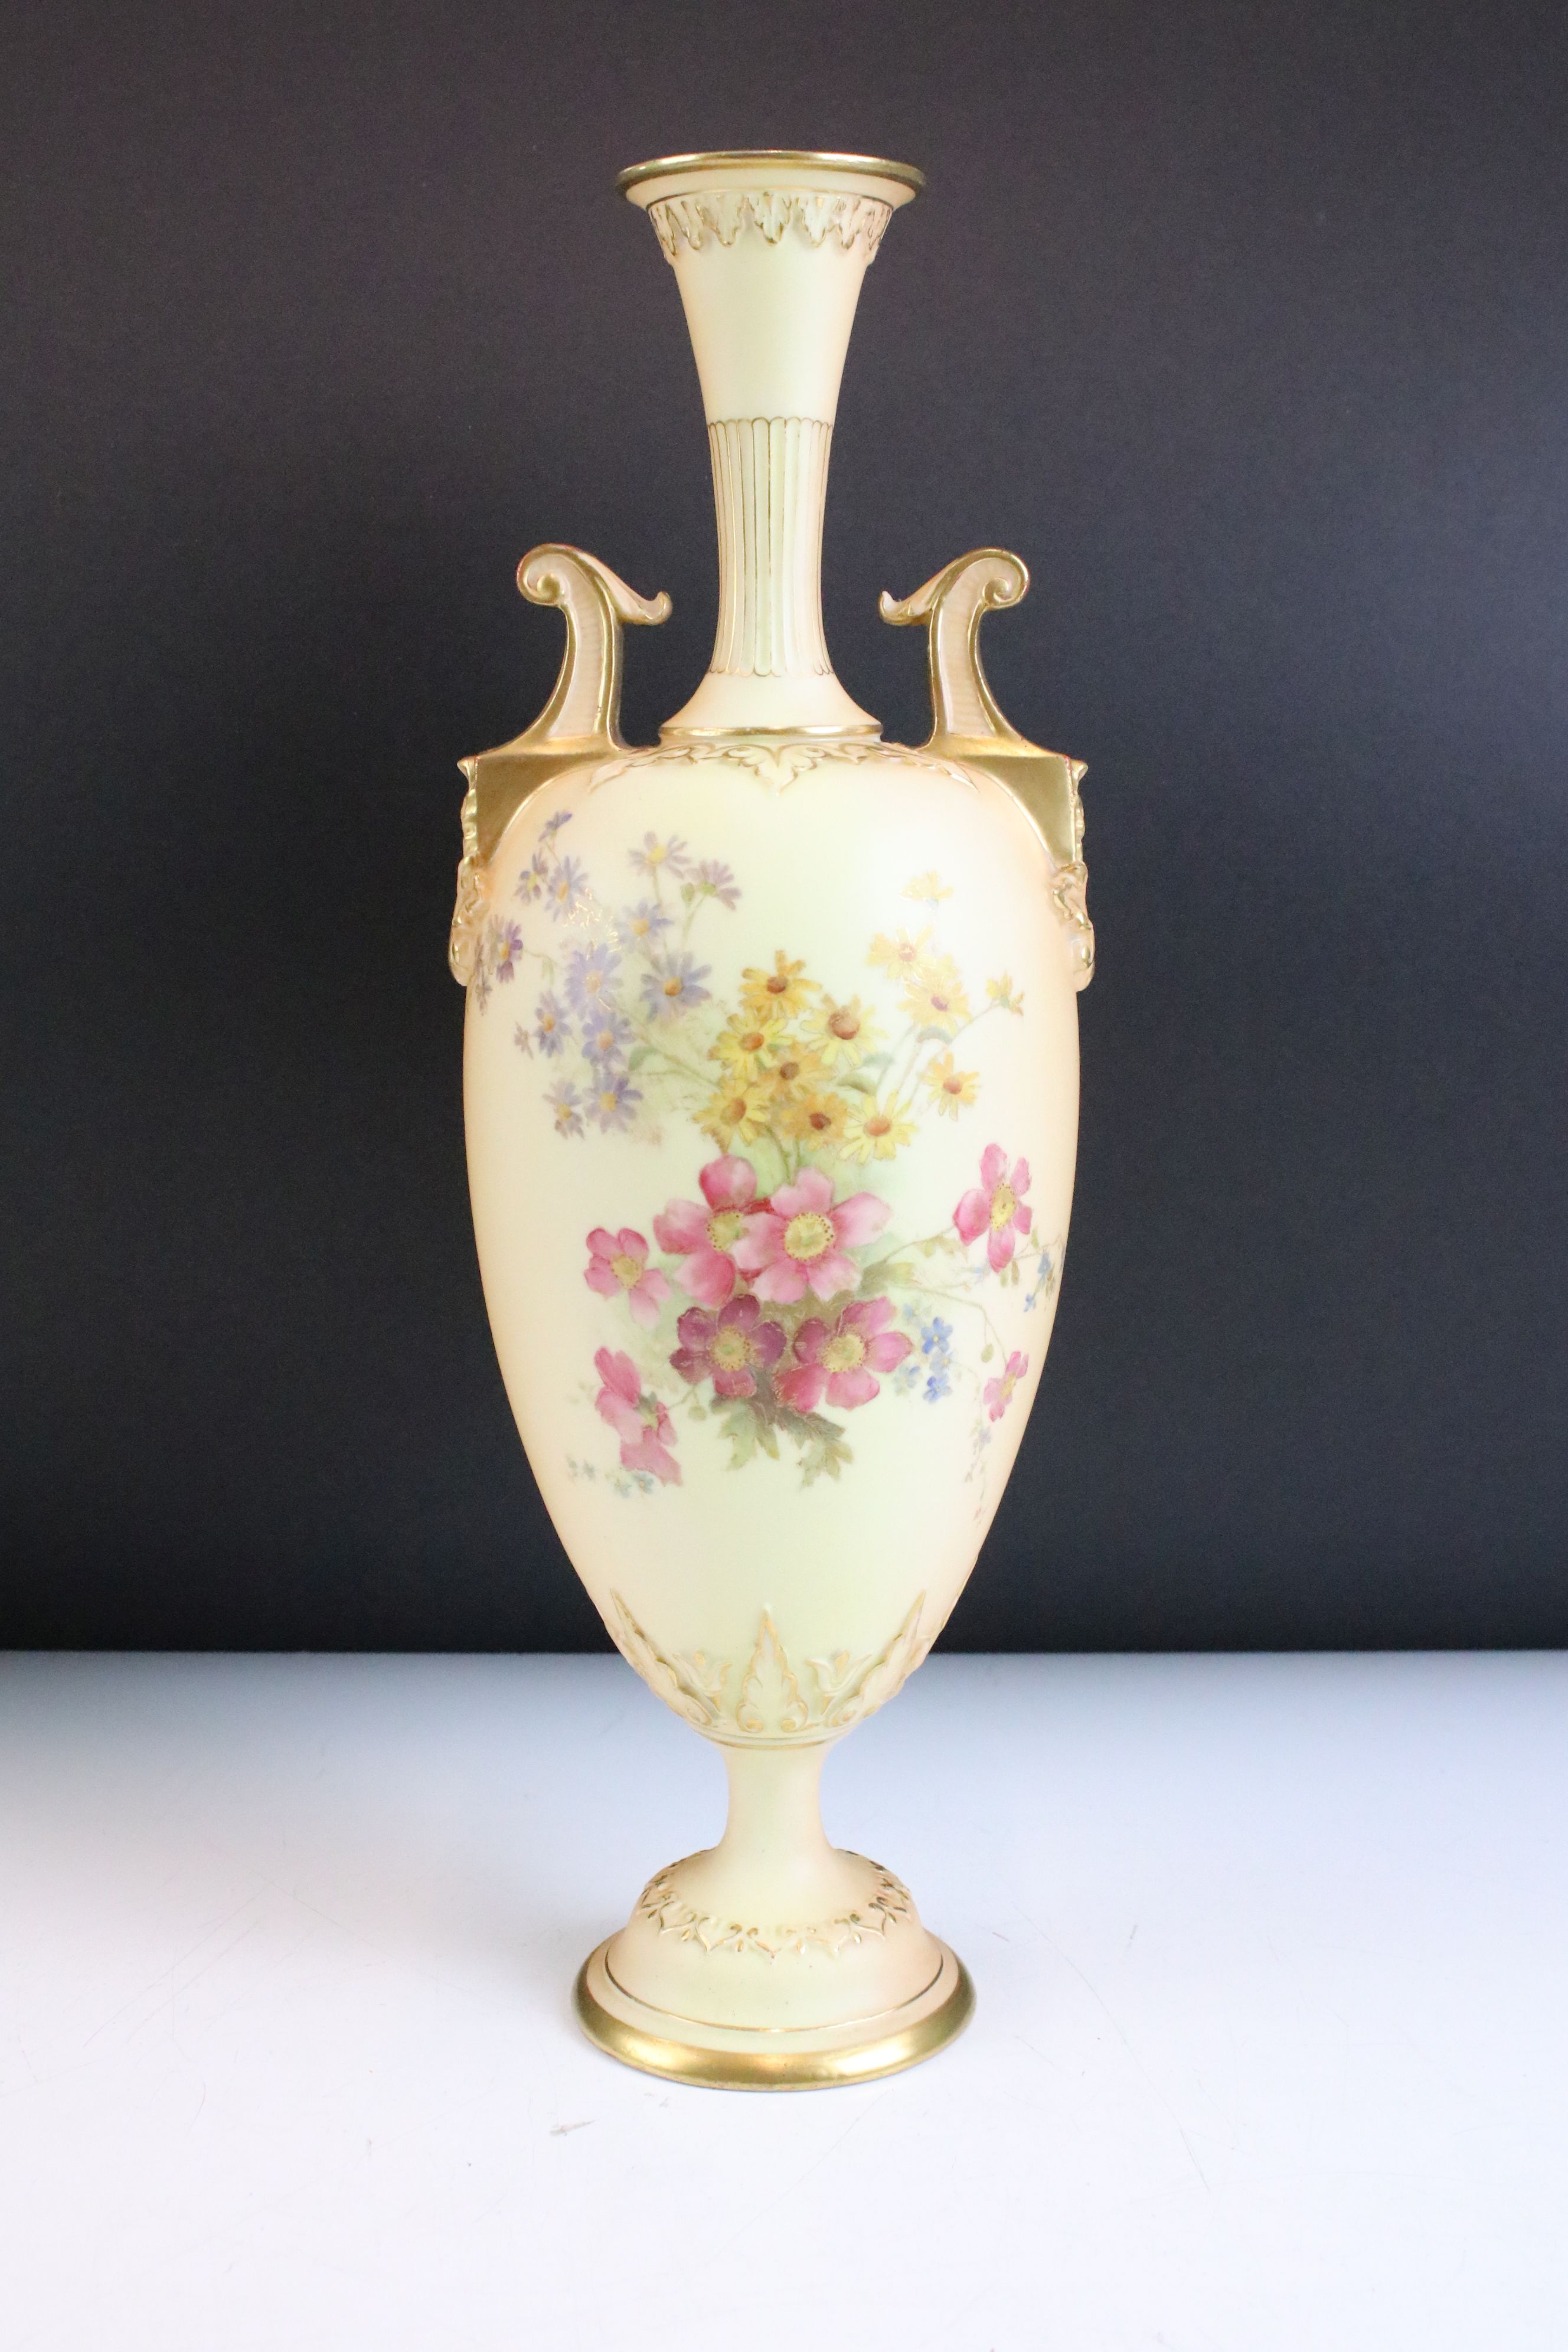 19th Century ivory blush amphora twin handled vase. The vase having moulded handles with gilt